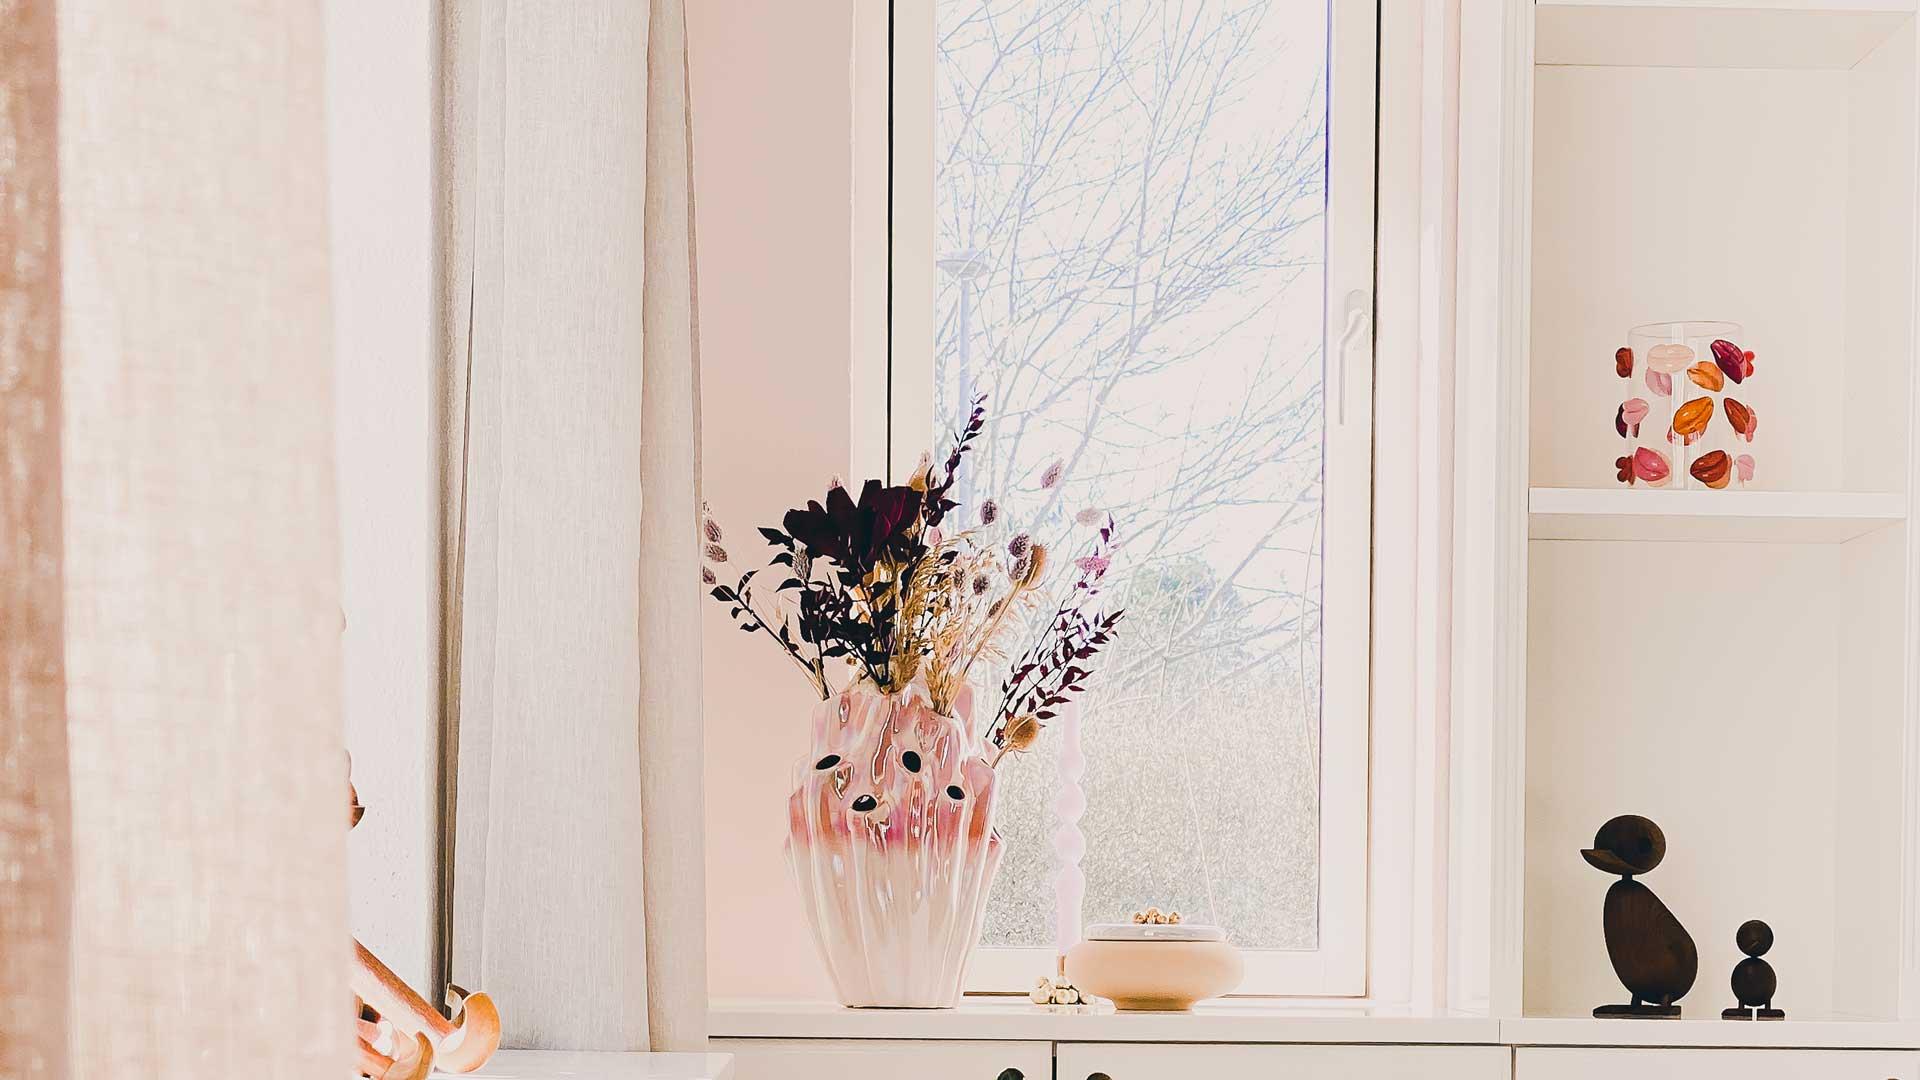 A vase in a window